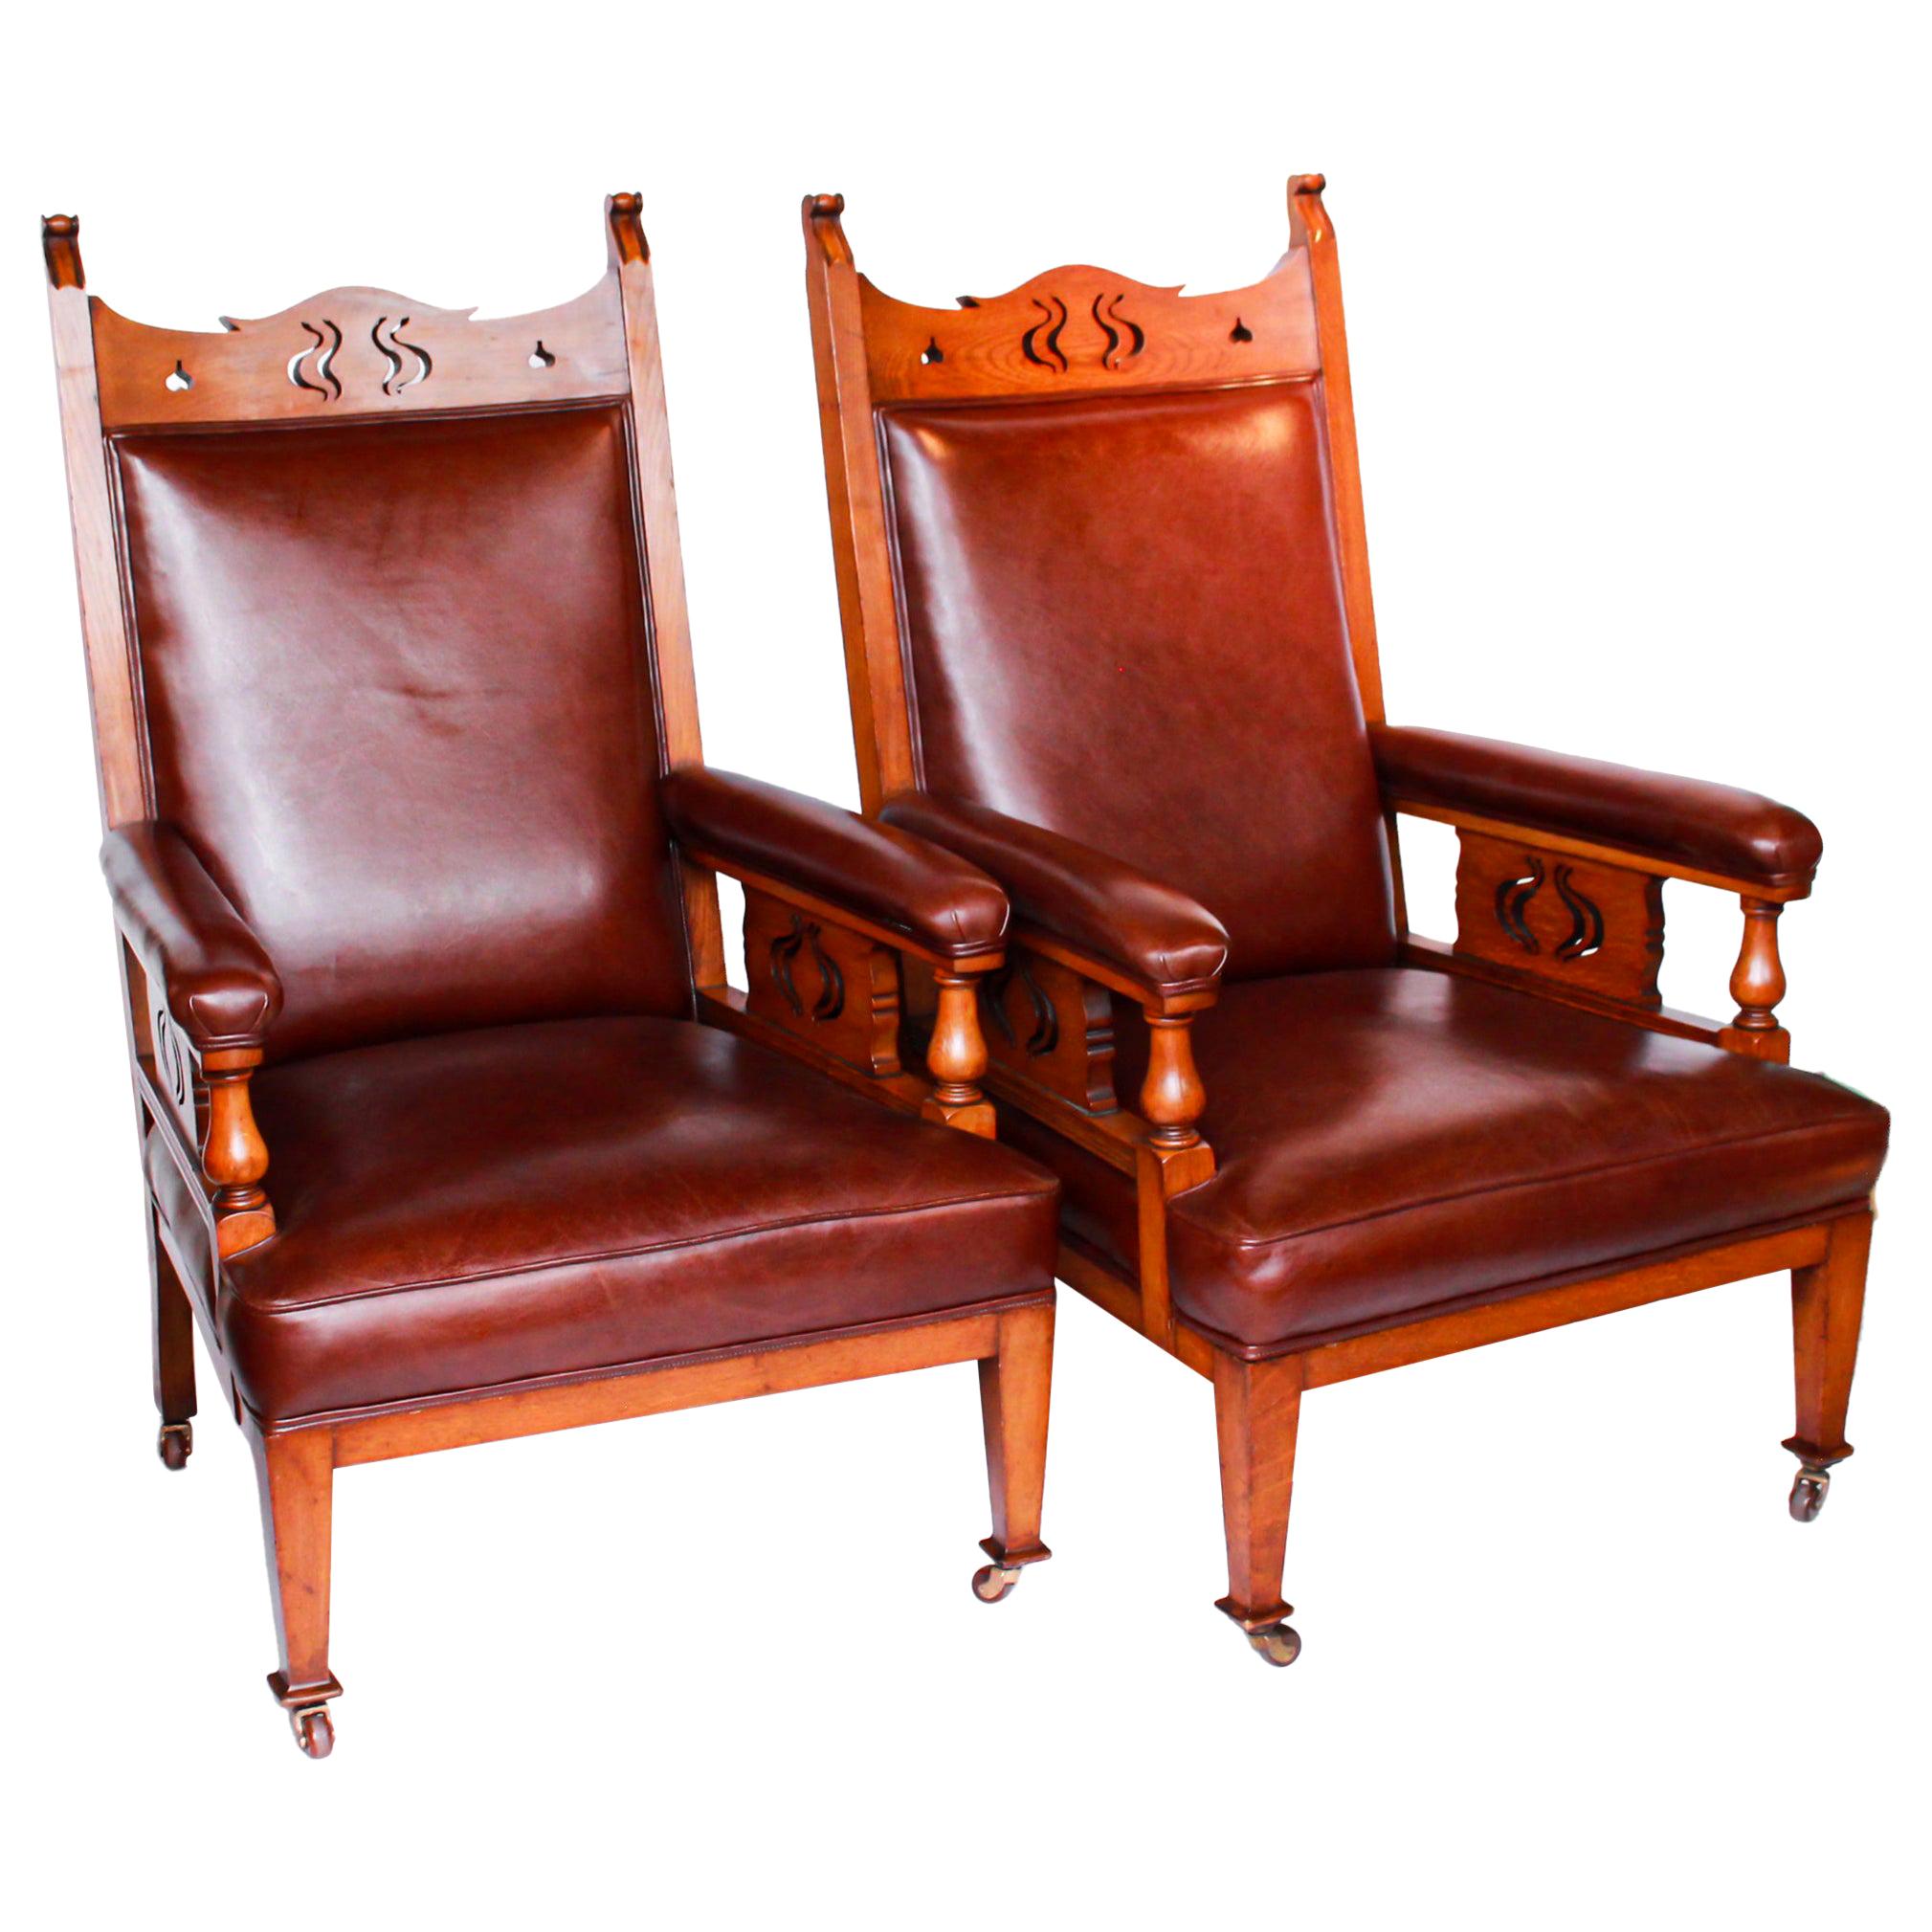 Pair of Arts & Craft's Library Chairs Solid Oak Upholstery in Chestnut Leather